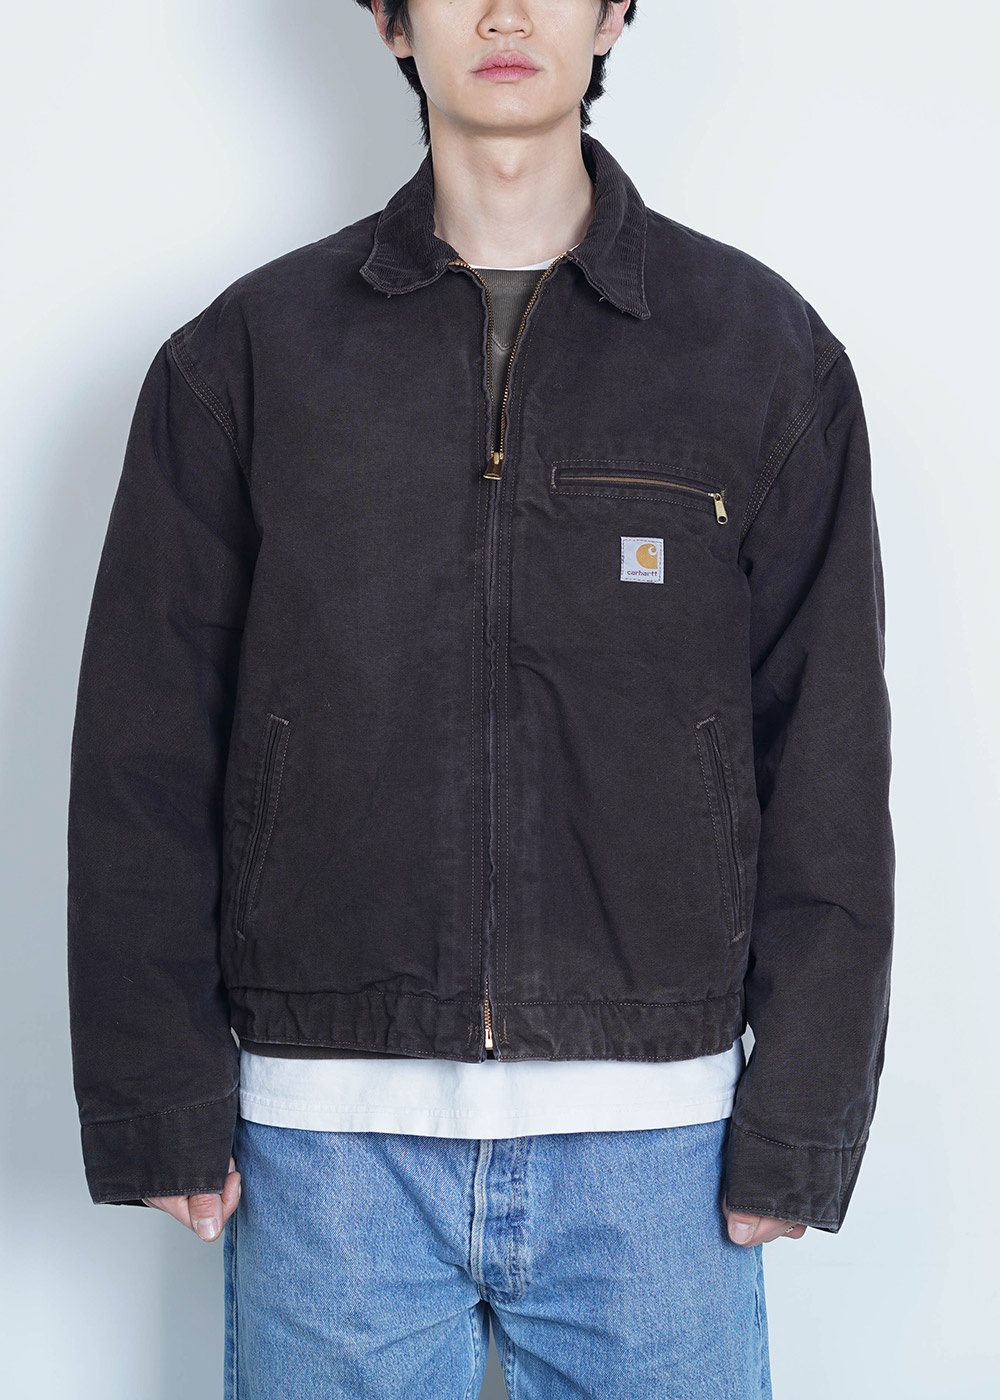 reproduction 035 / carhartt (Overdyed)